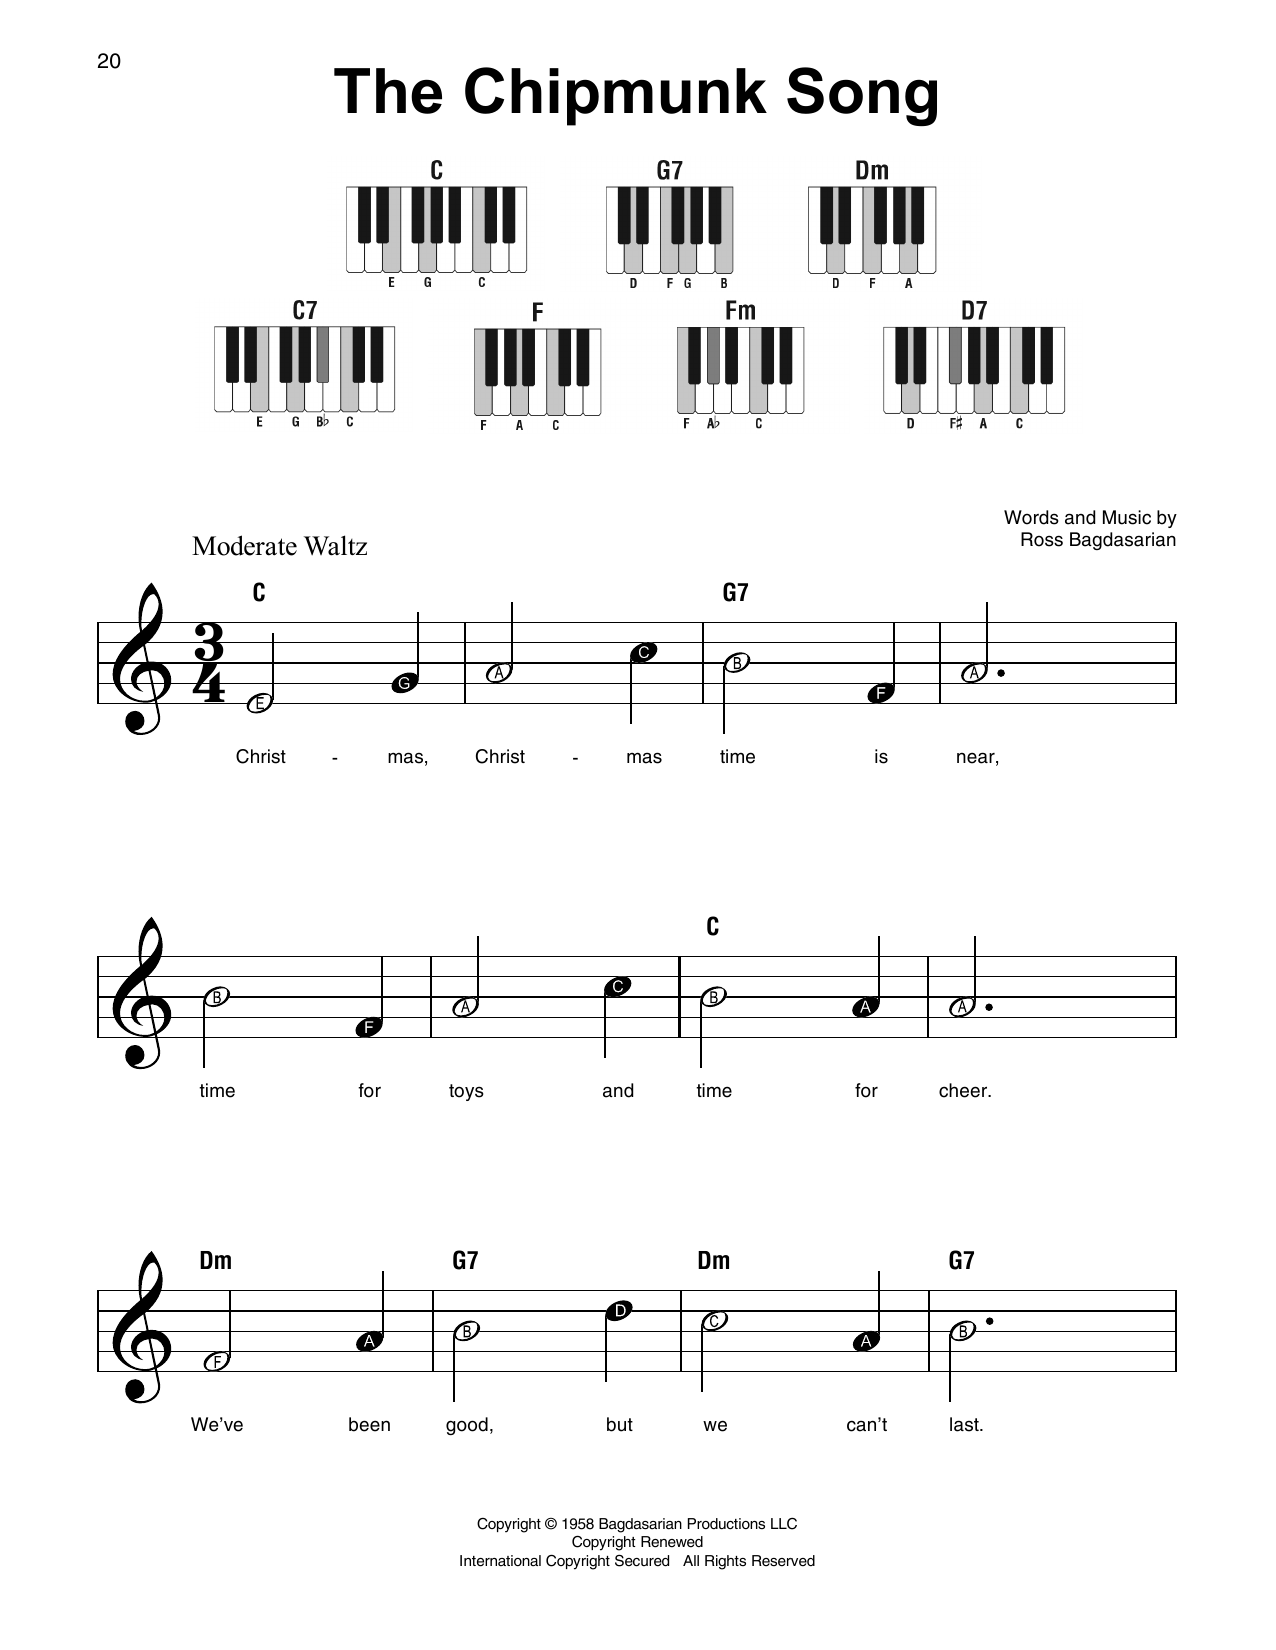 Download The Chipmunks The Chipmunk Song Sheet Music